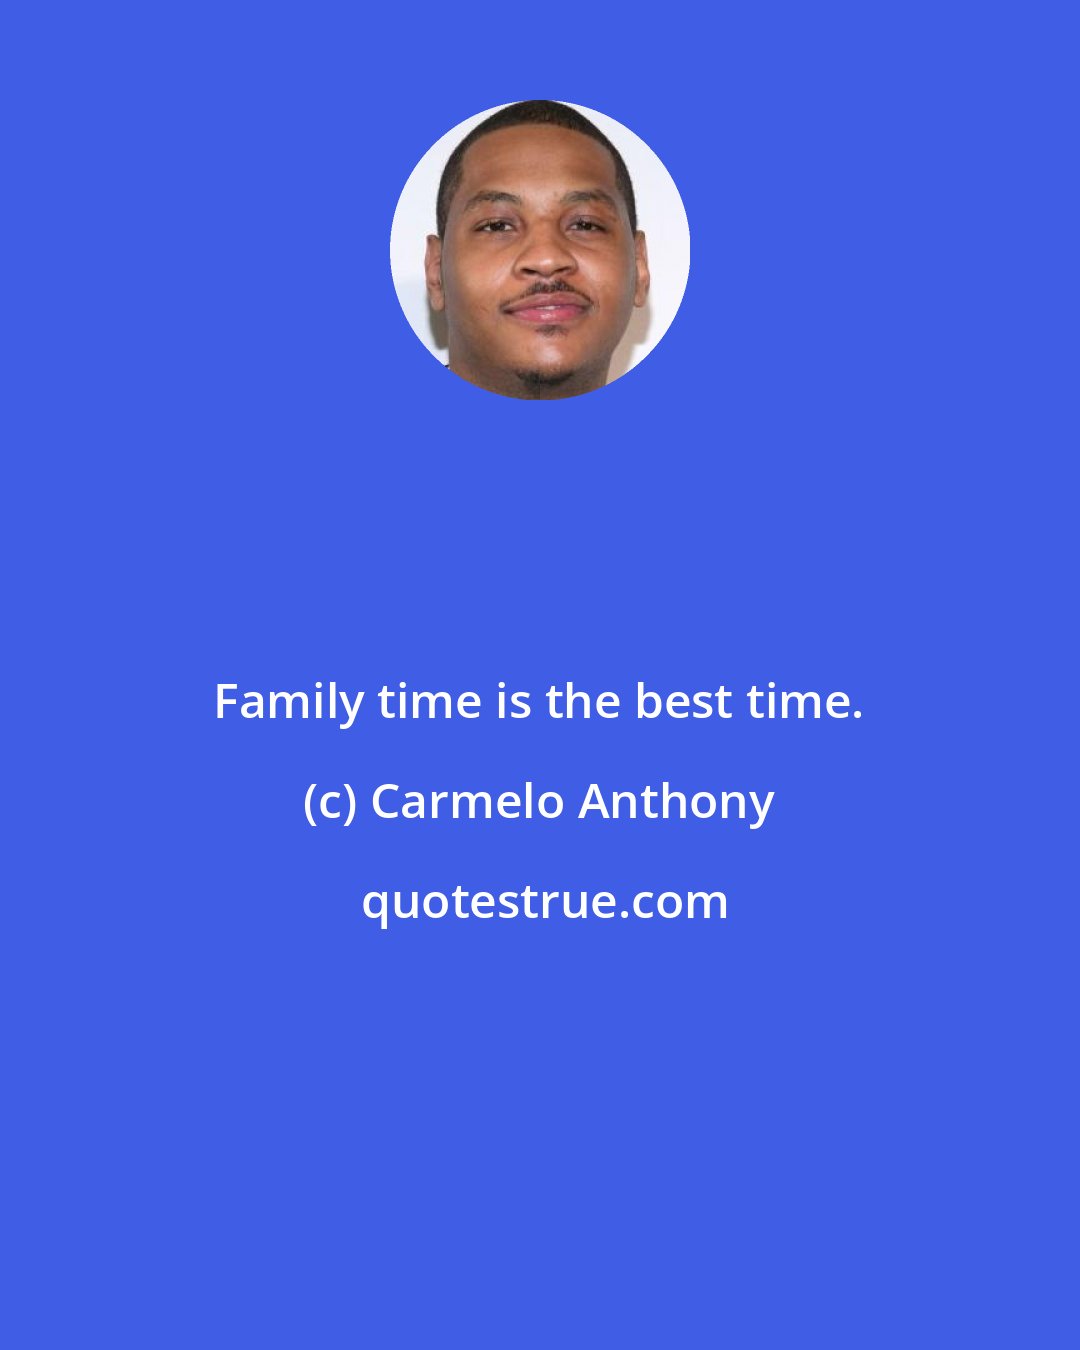 Carmelo Anthony: Family time is the best time.